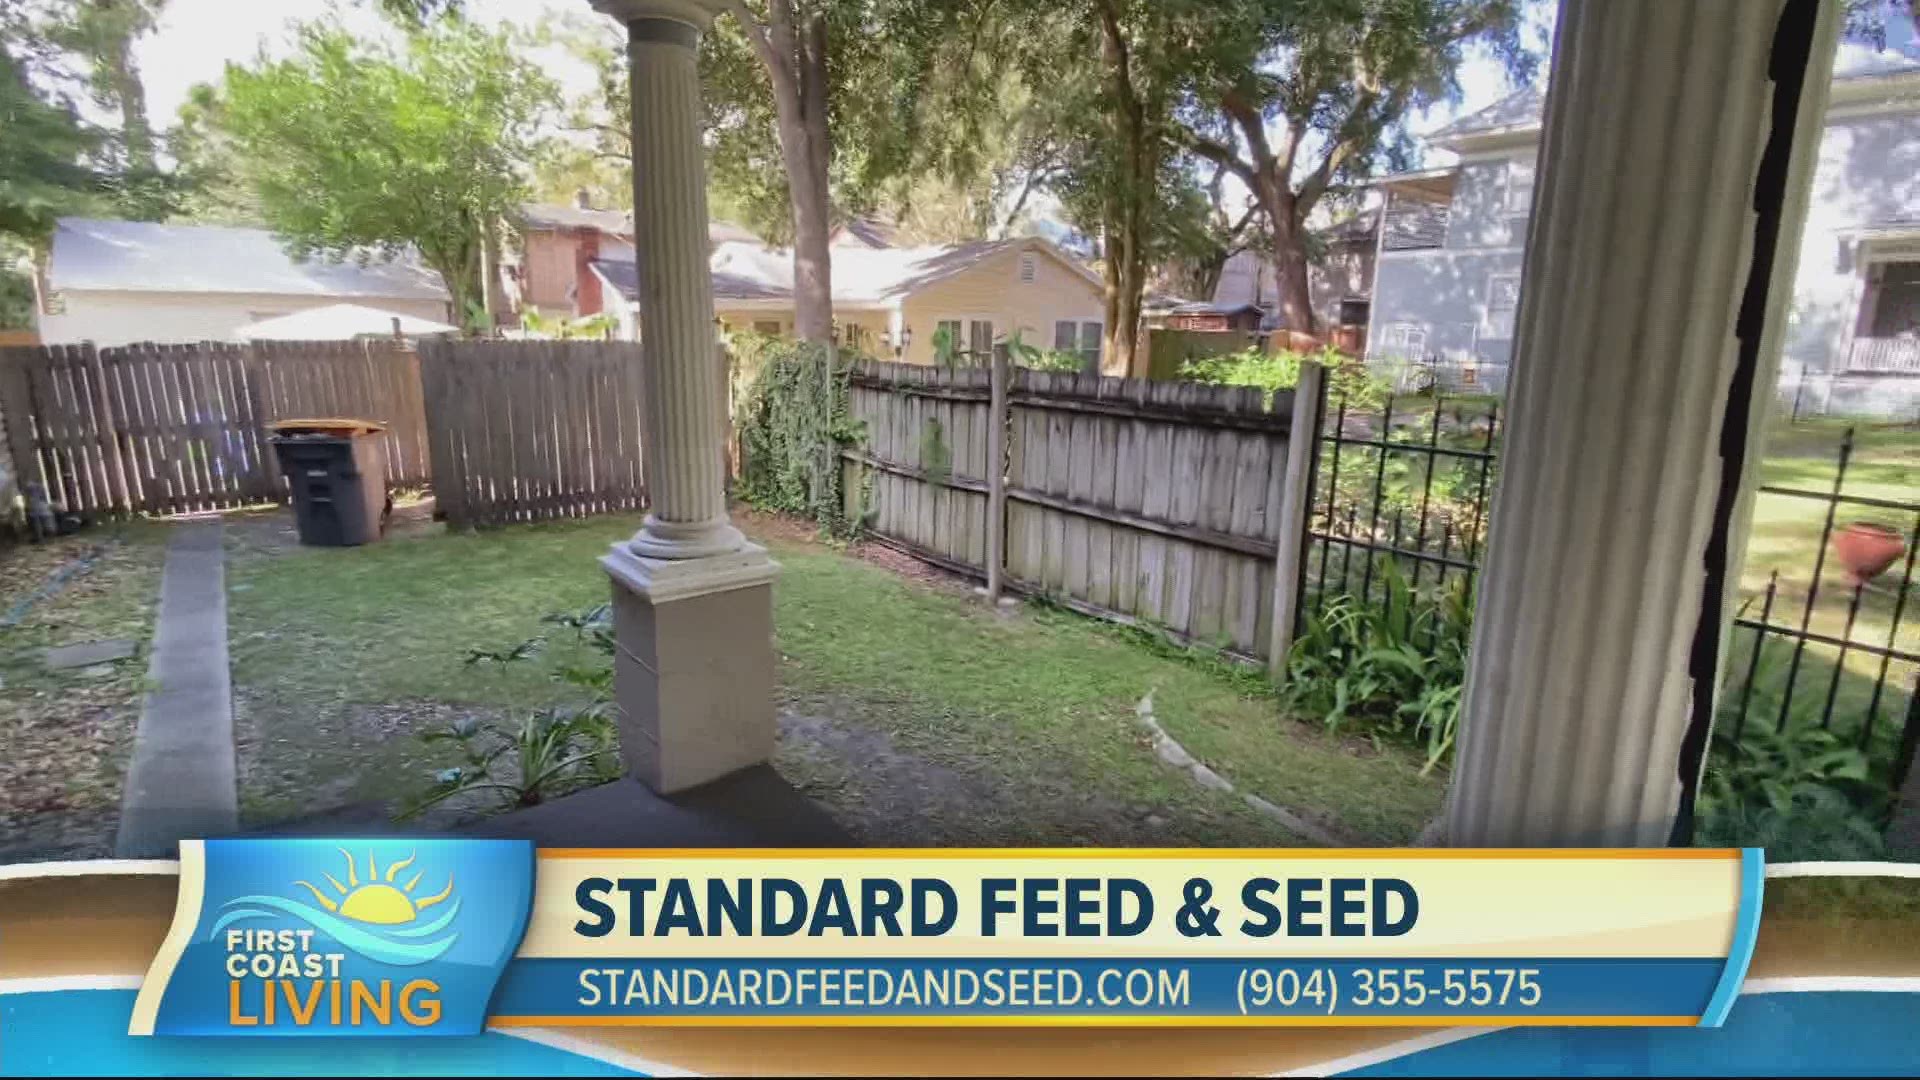 See how Standard Feed & Seed can help!